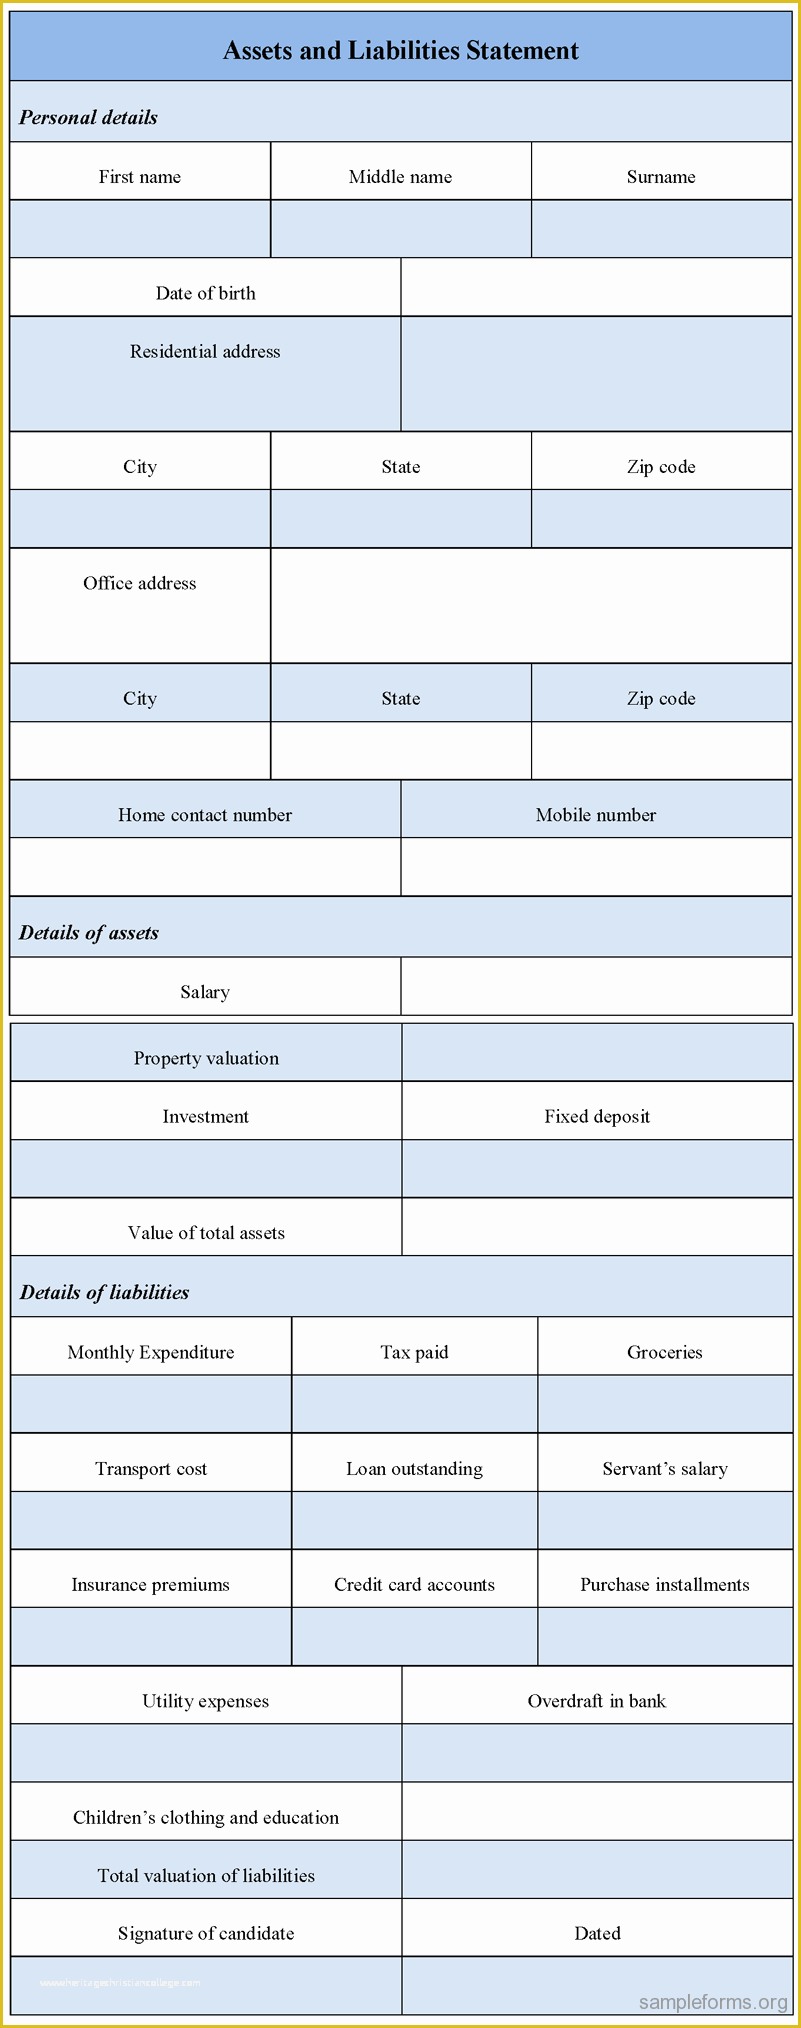 Assets and Liabilities Template Free Download Of assets and Liabilities Statement form Sample forms